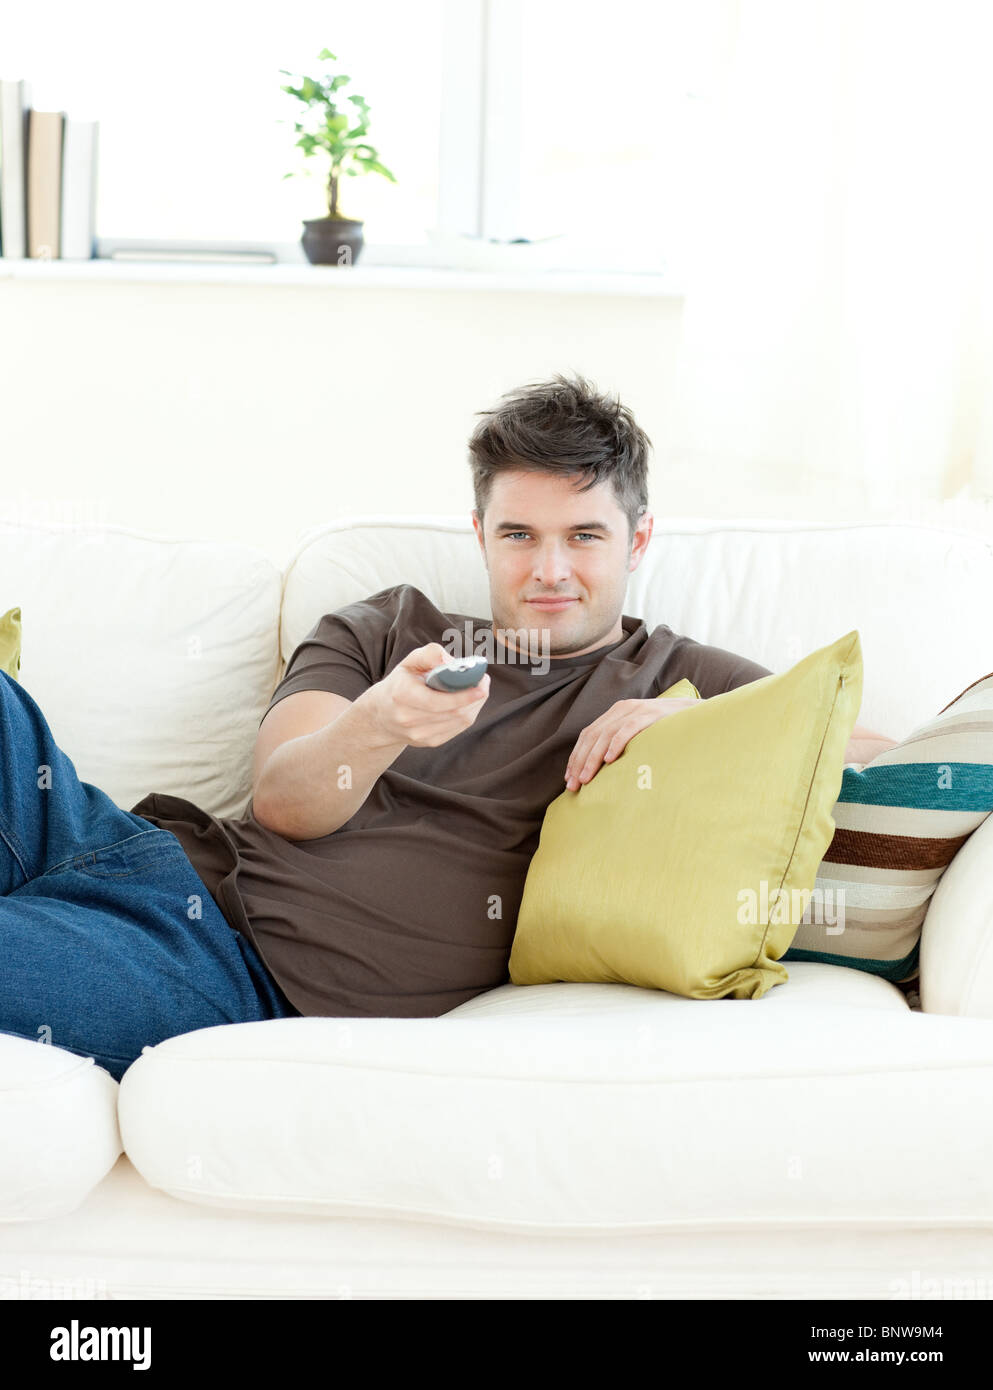 Smiling man is relaxing Stock Photo